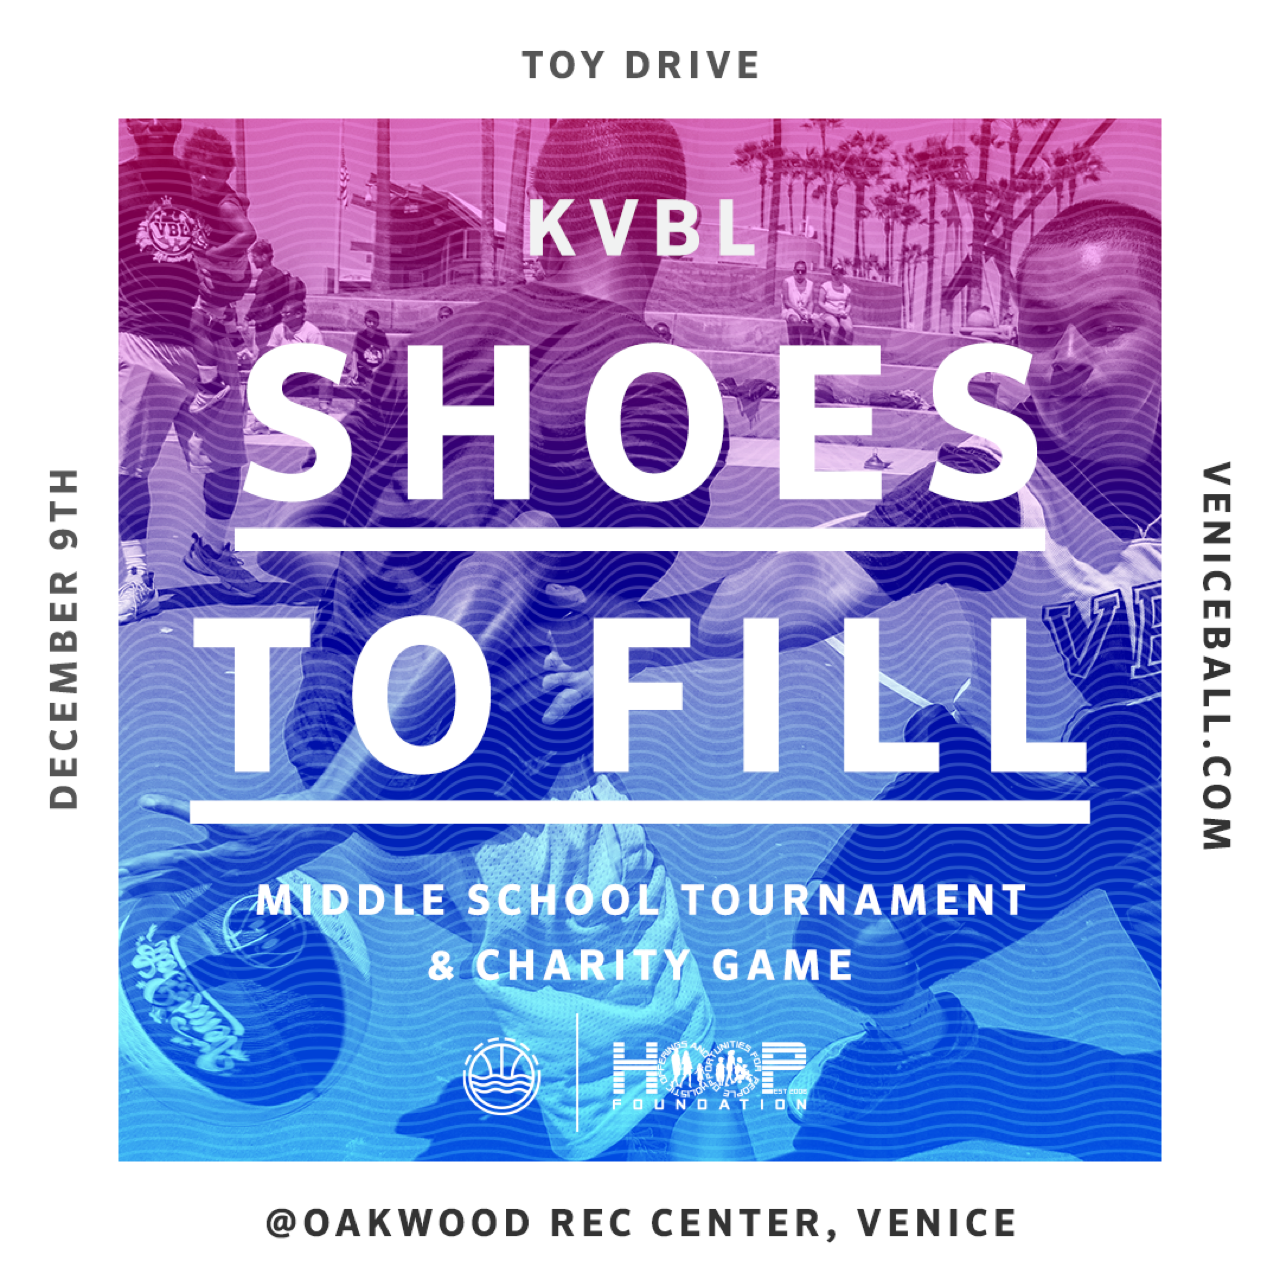 KVBL Shoes to Fill – Toy Drive 2017